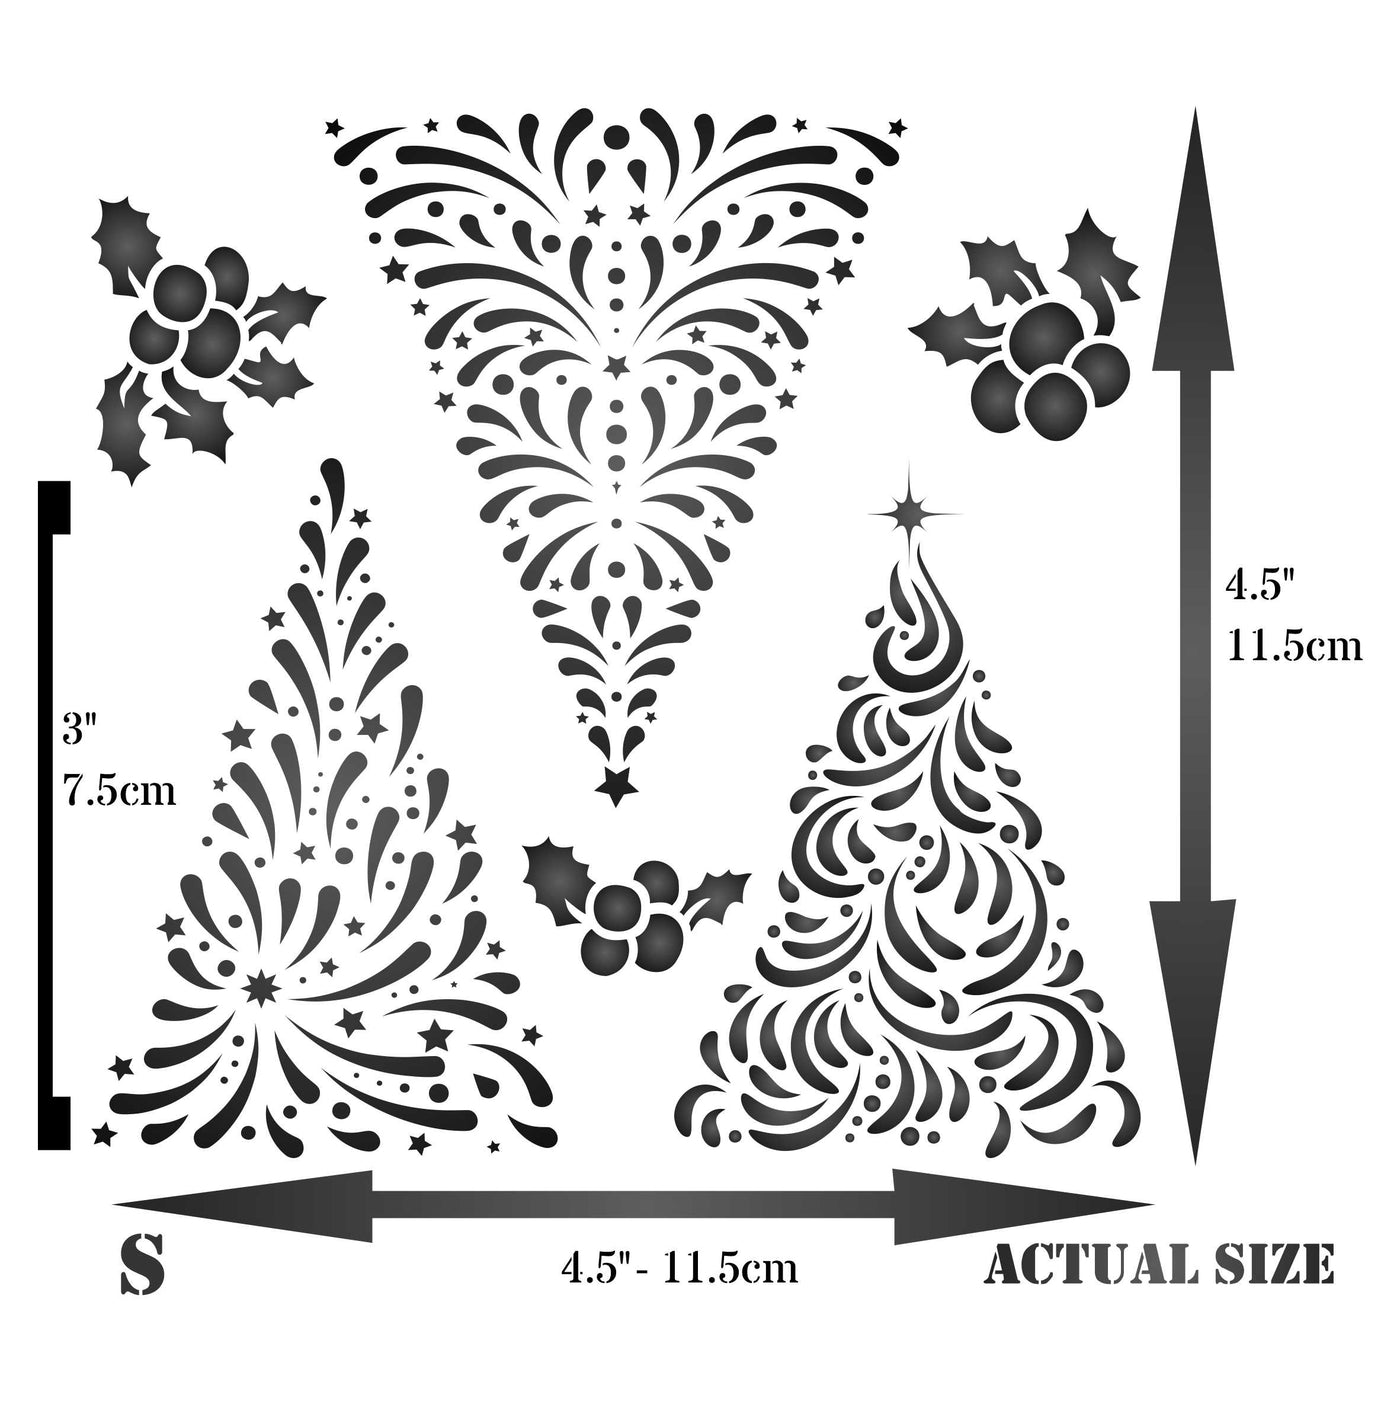 Christmas Trees Stencil - 3X Stylized Trees for Cards Decoration